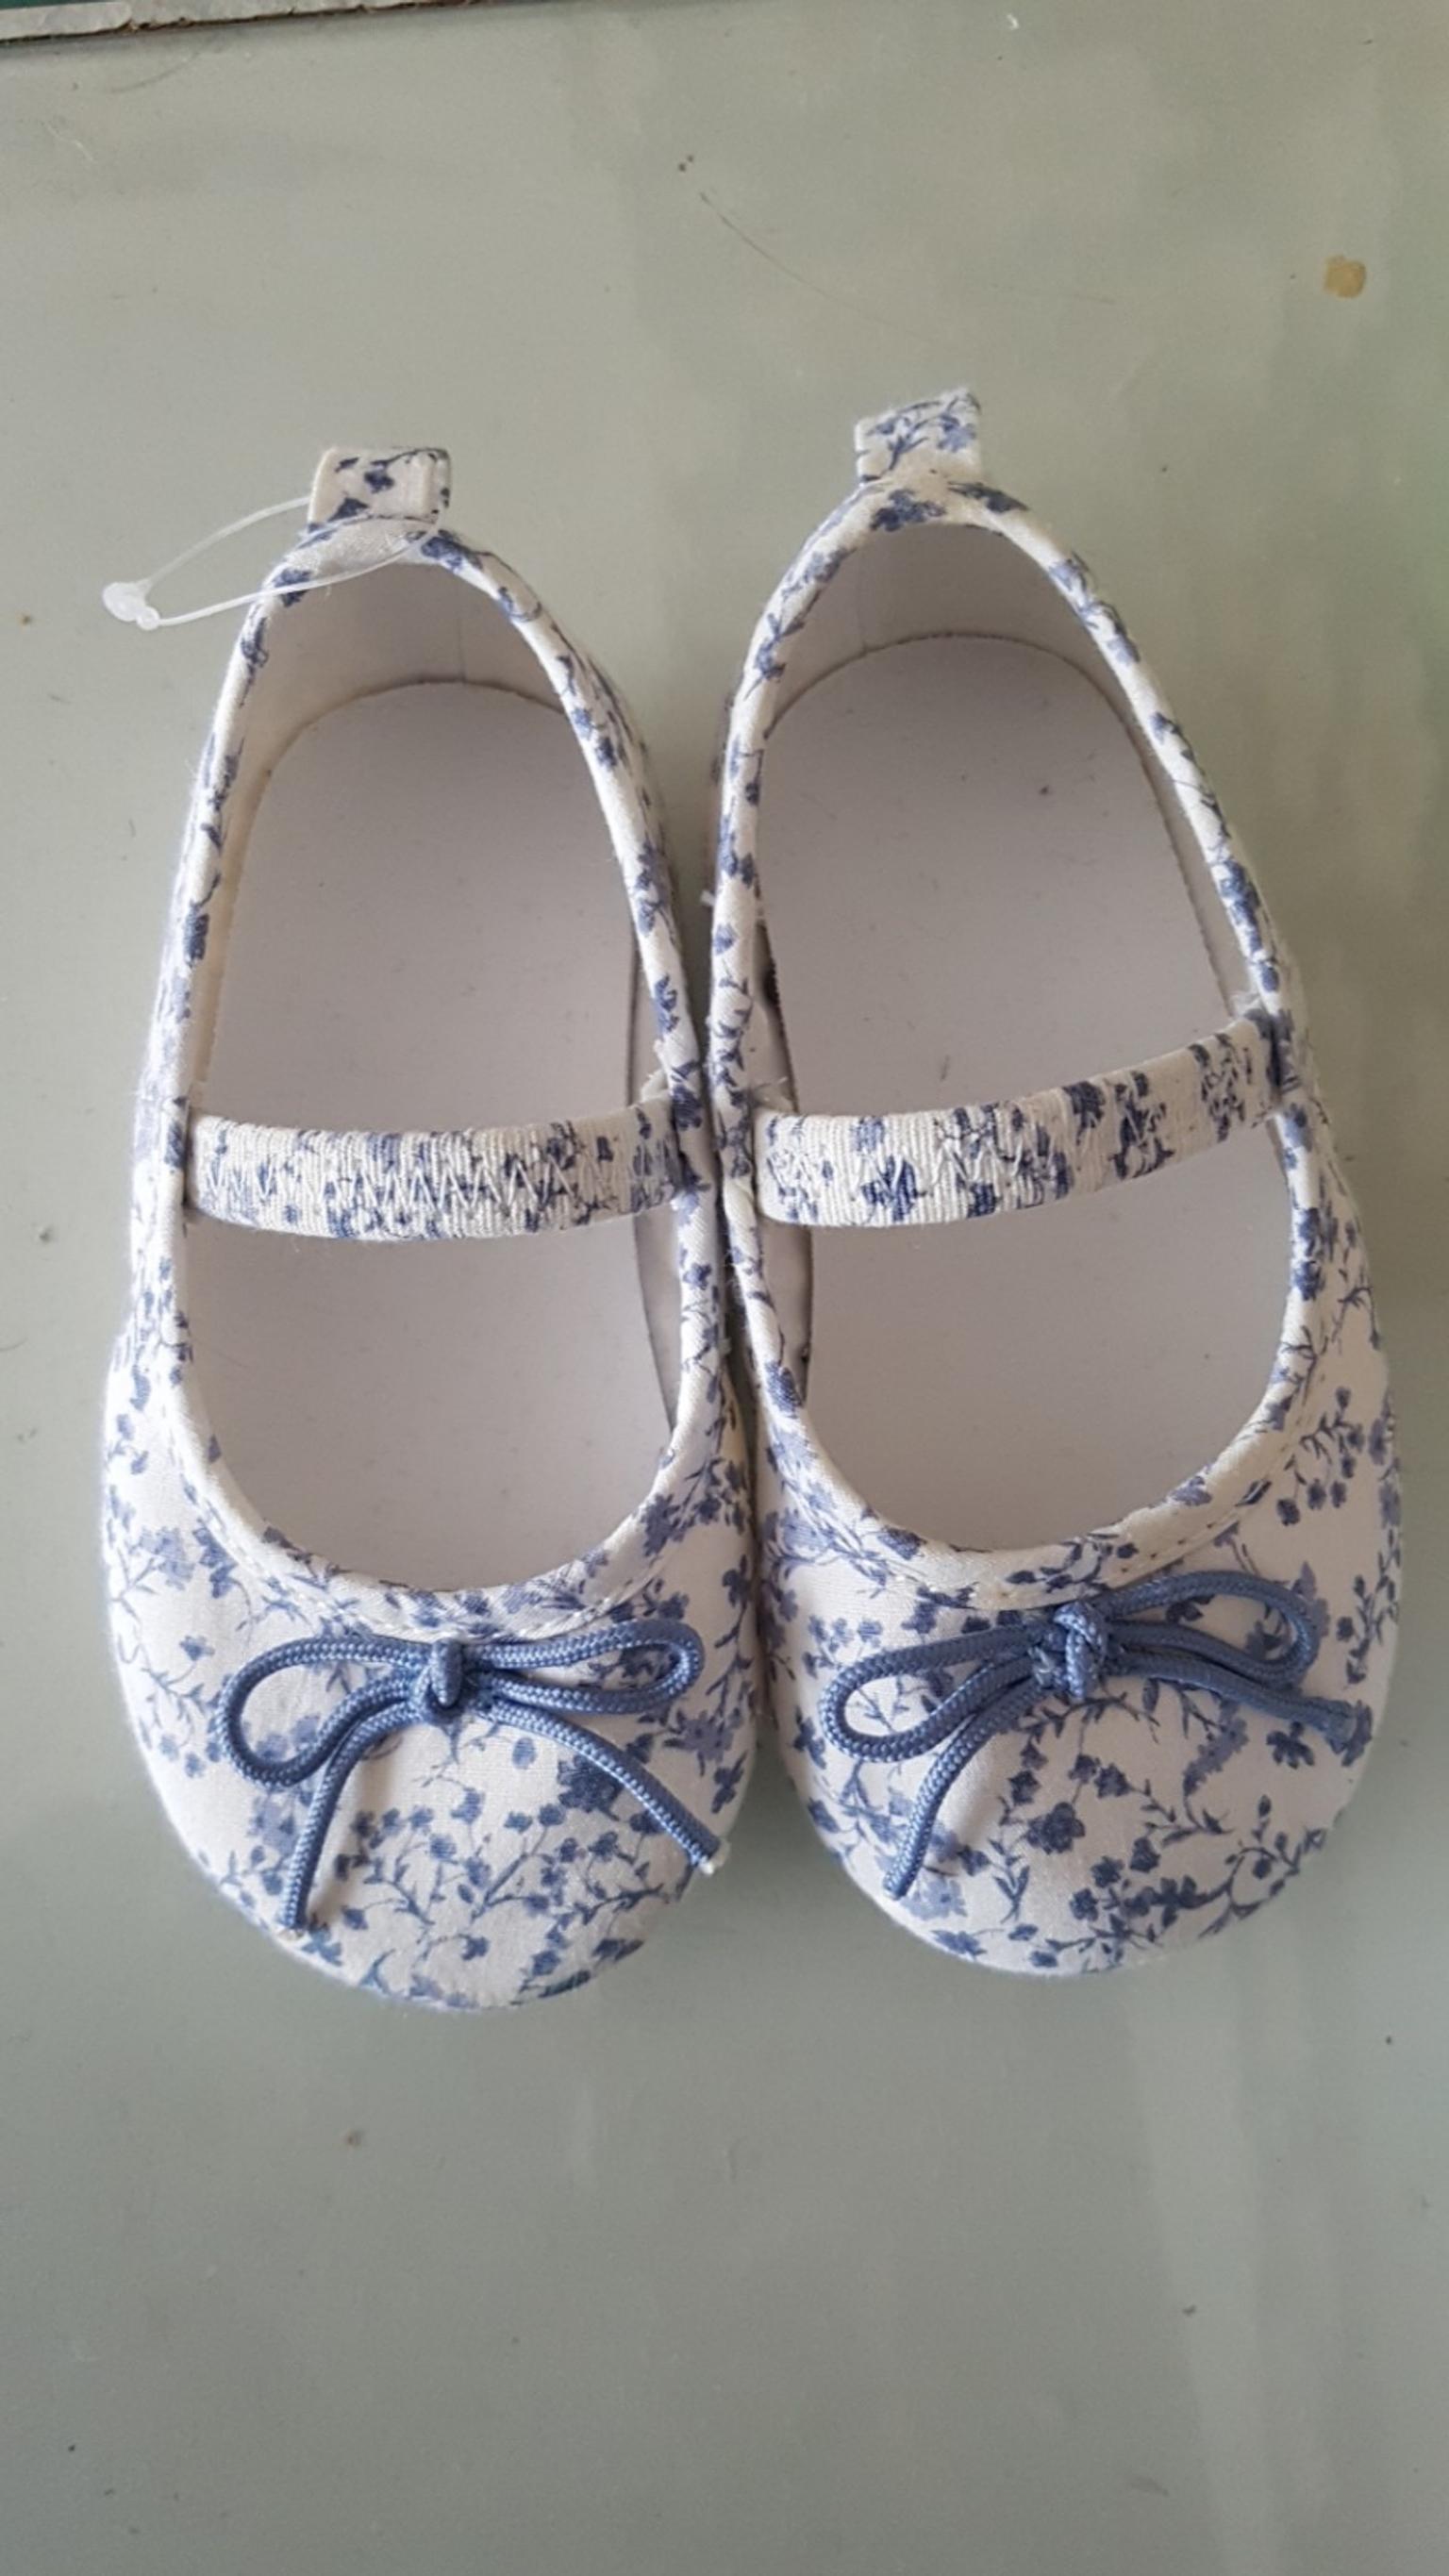 h&m shoes for baby girl